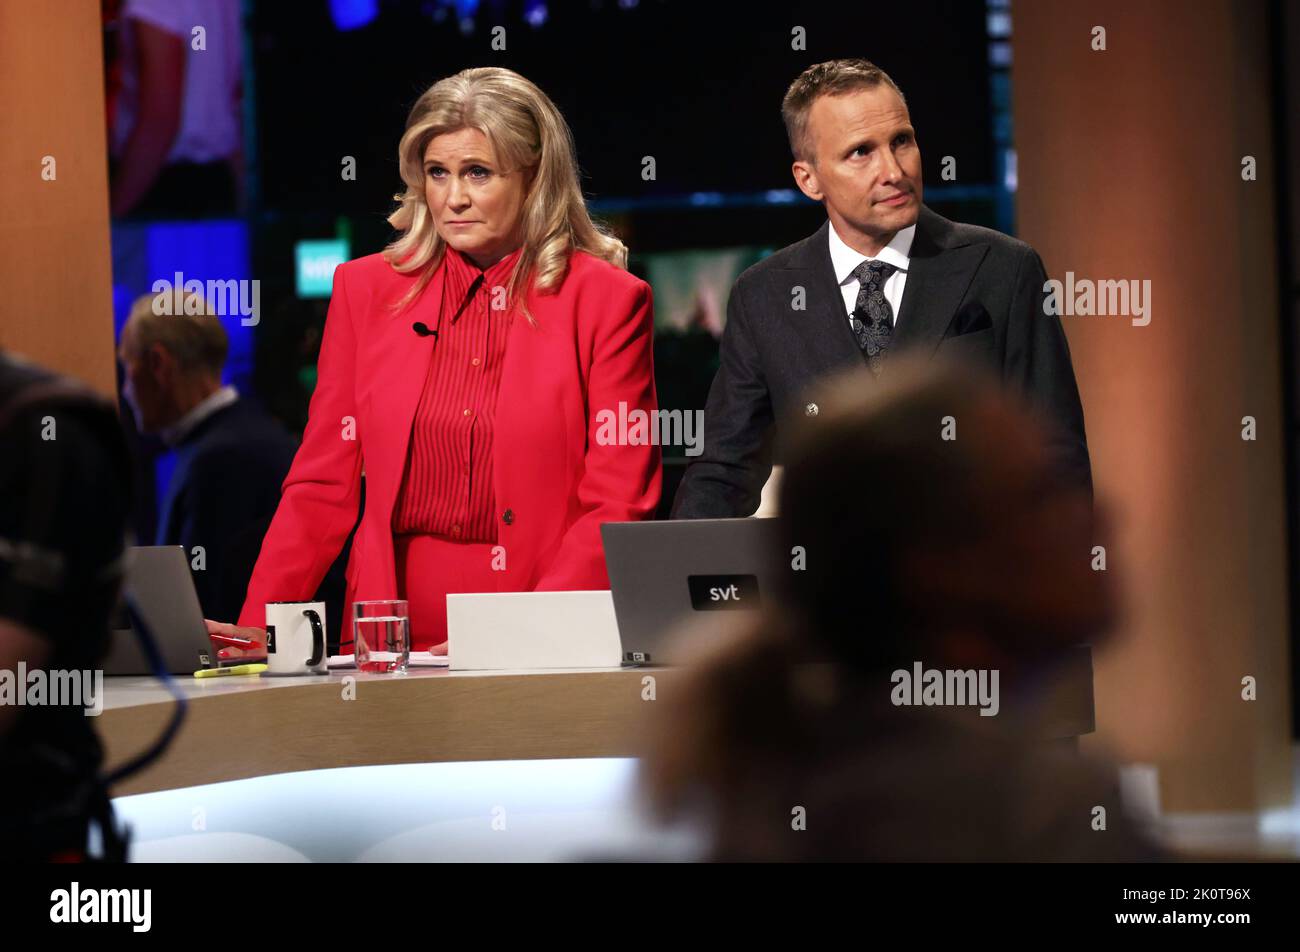 The Swedish parliamentary elections, election day, during Sunday in Stockholm, Sweden. In the picture: Sveriges Television's broadcast during election evening. In the picture: Camilla Kvartoft and Anders Holmberg. Stock Photo